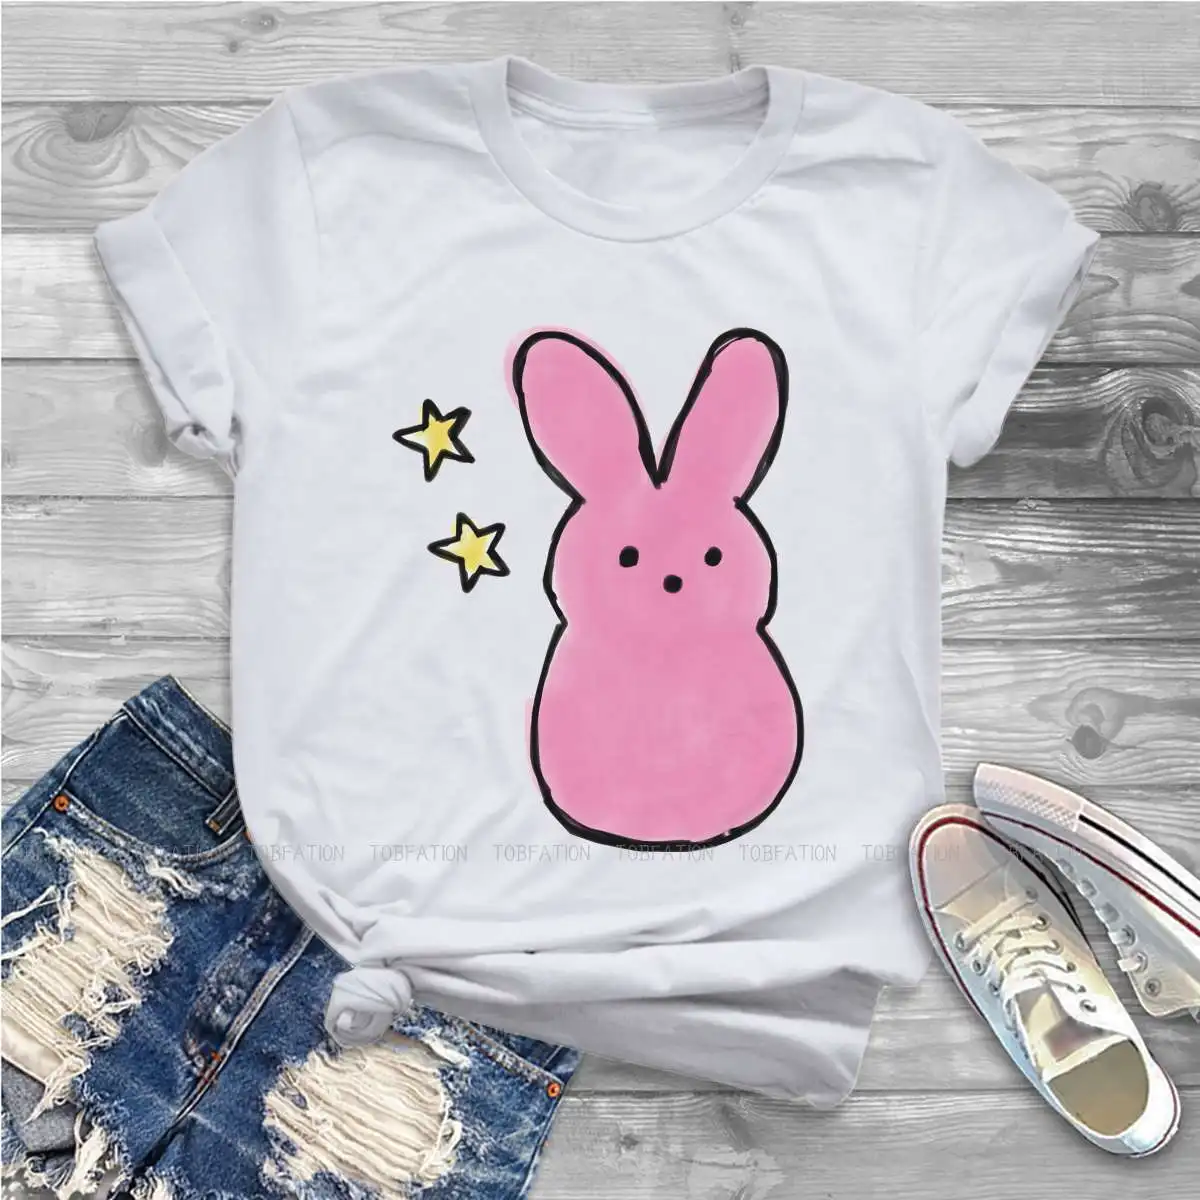 

BEST SELLER Bunny Merchandise Women Tshirts Lil Peep Hellboy Aesthetic Vintage Female Clothing Loose Cotton Graphic Clothes